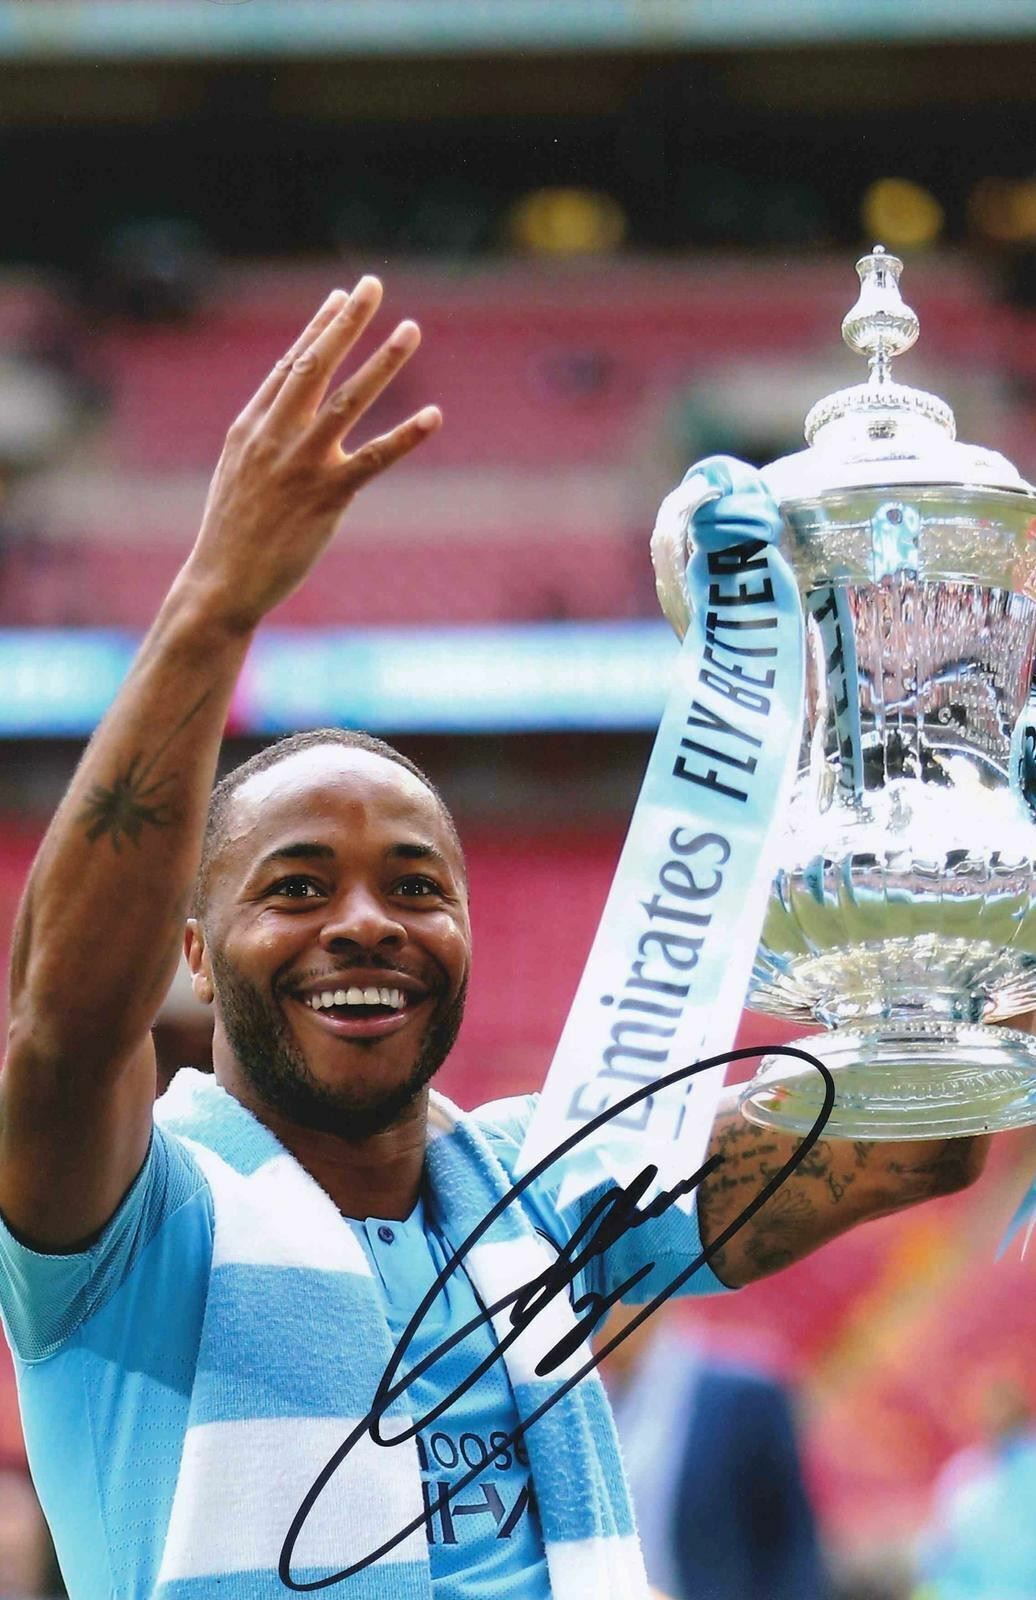 RAHEEM STERLING SIGNED MANCHESTER CITY 12X8 FA CUP PHOTO (AFTAL COA)